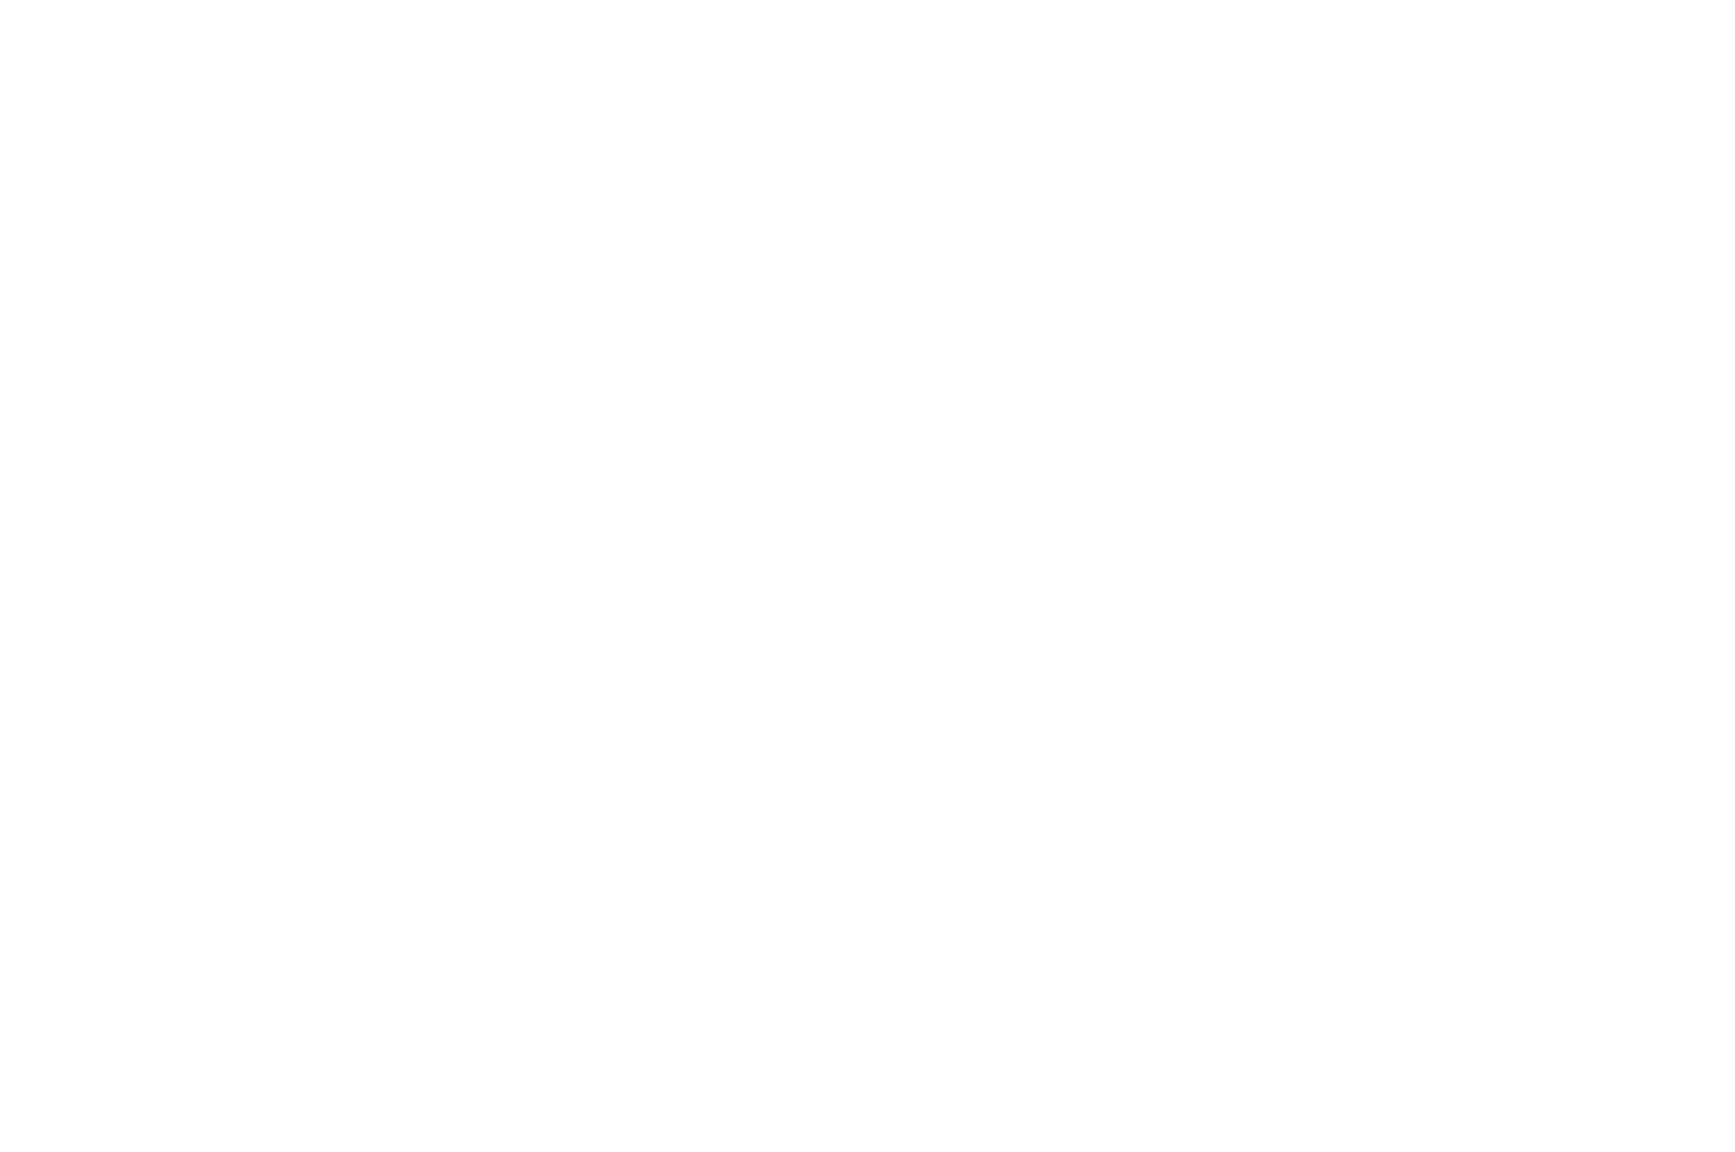 OFFICIAL SELECTION - The Roxbury International Film Festival - 2021.png